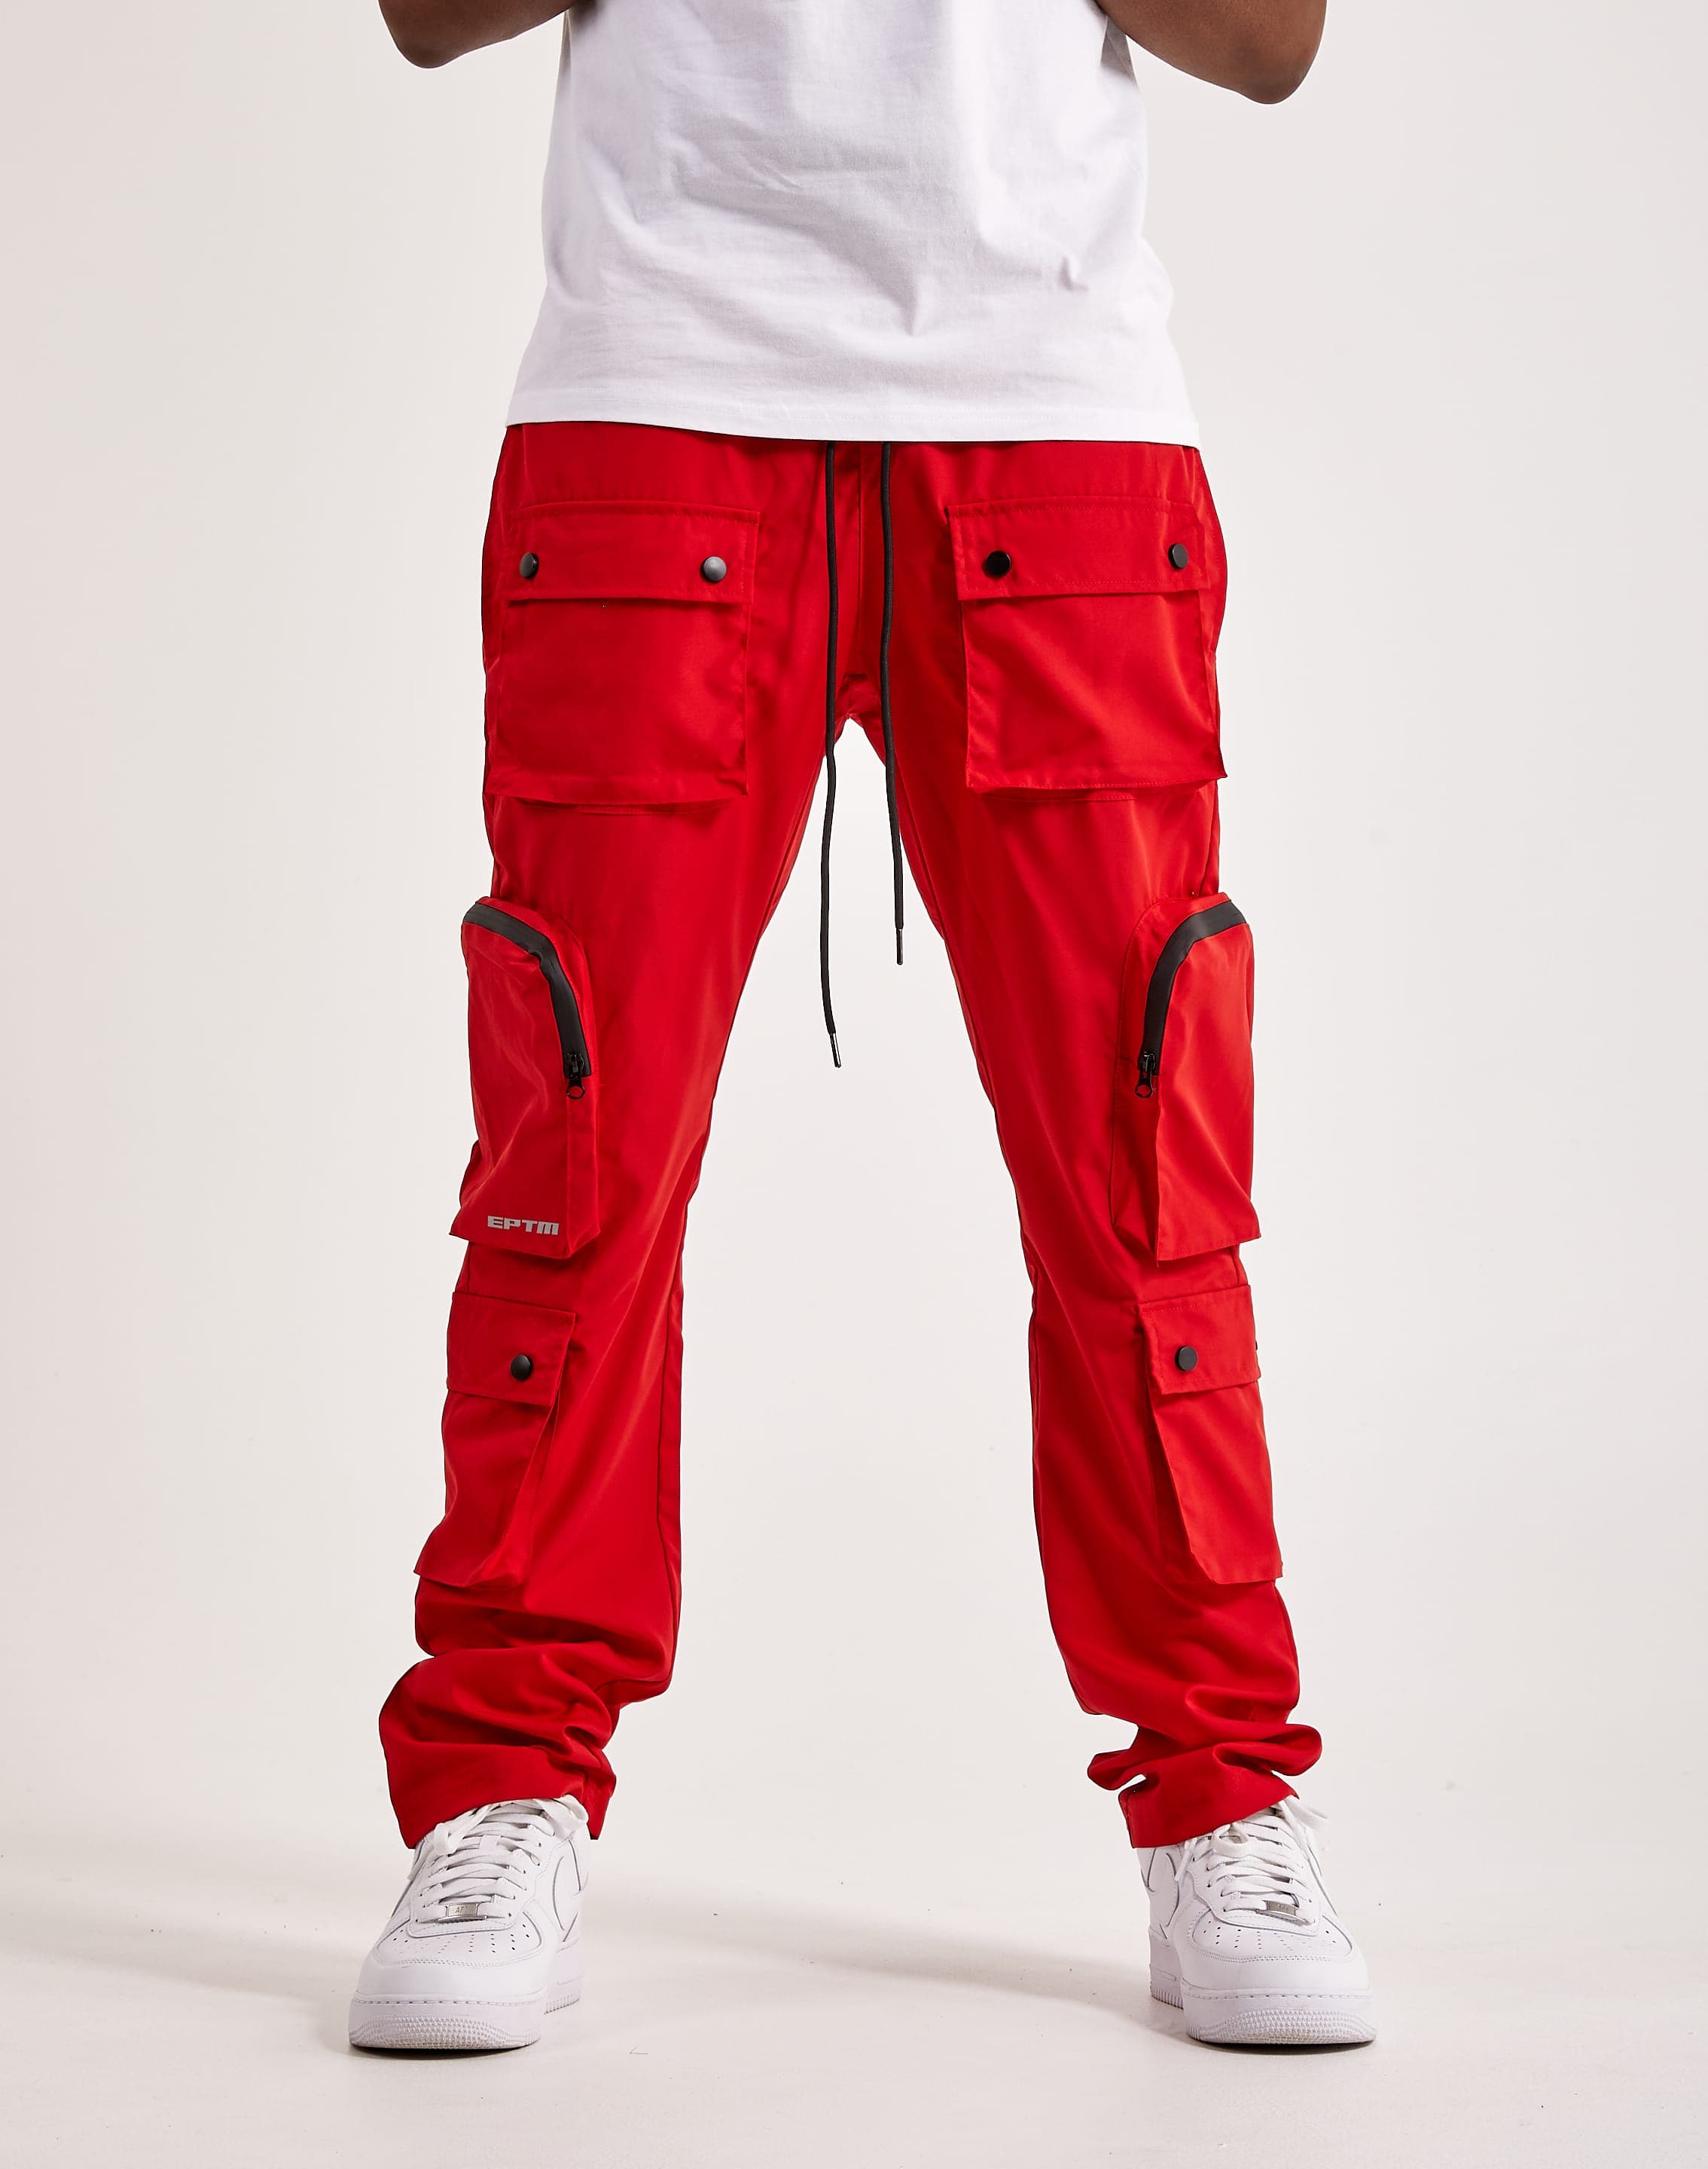 Stylish Cargo Pants For Boys Deals Clearance